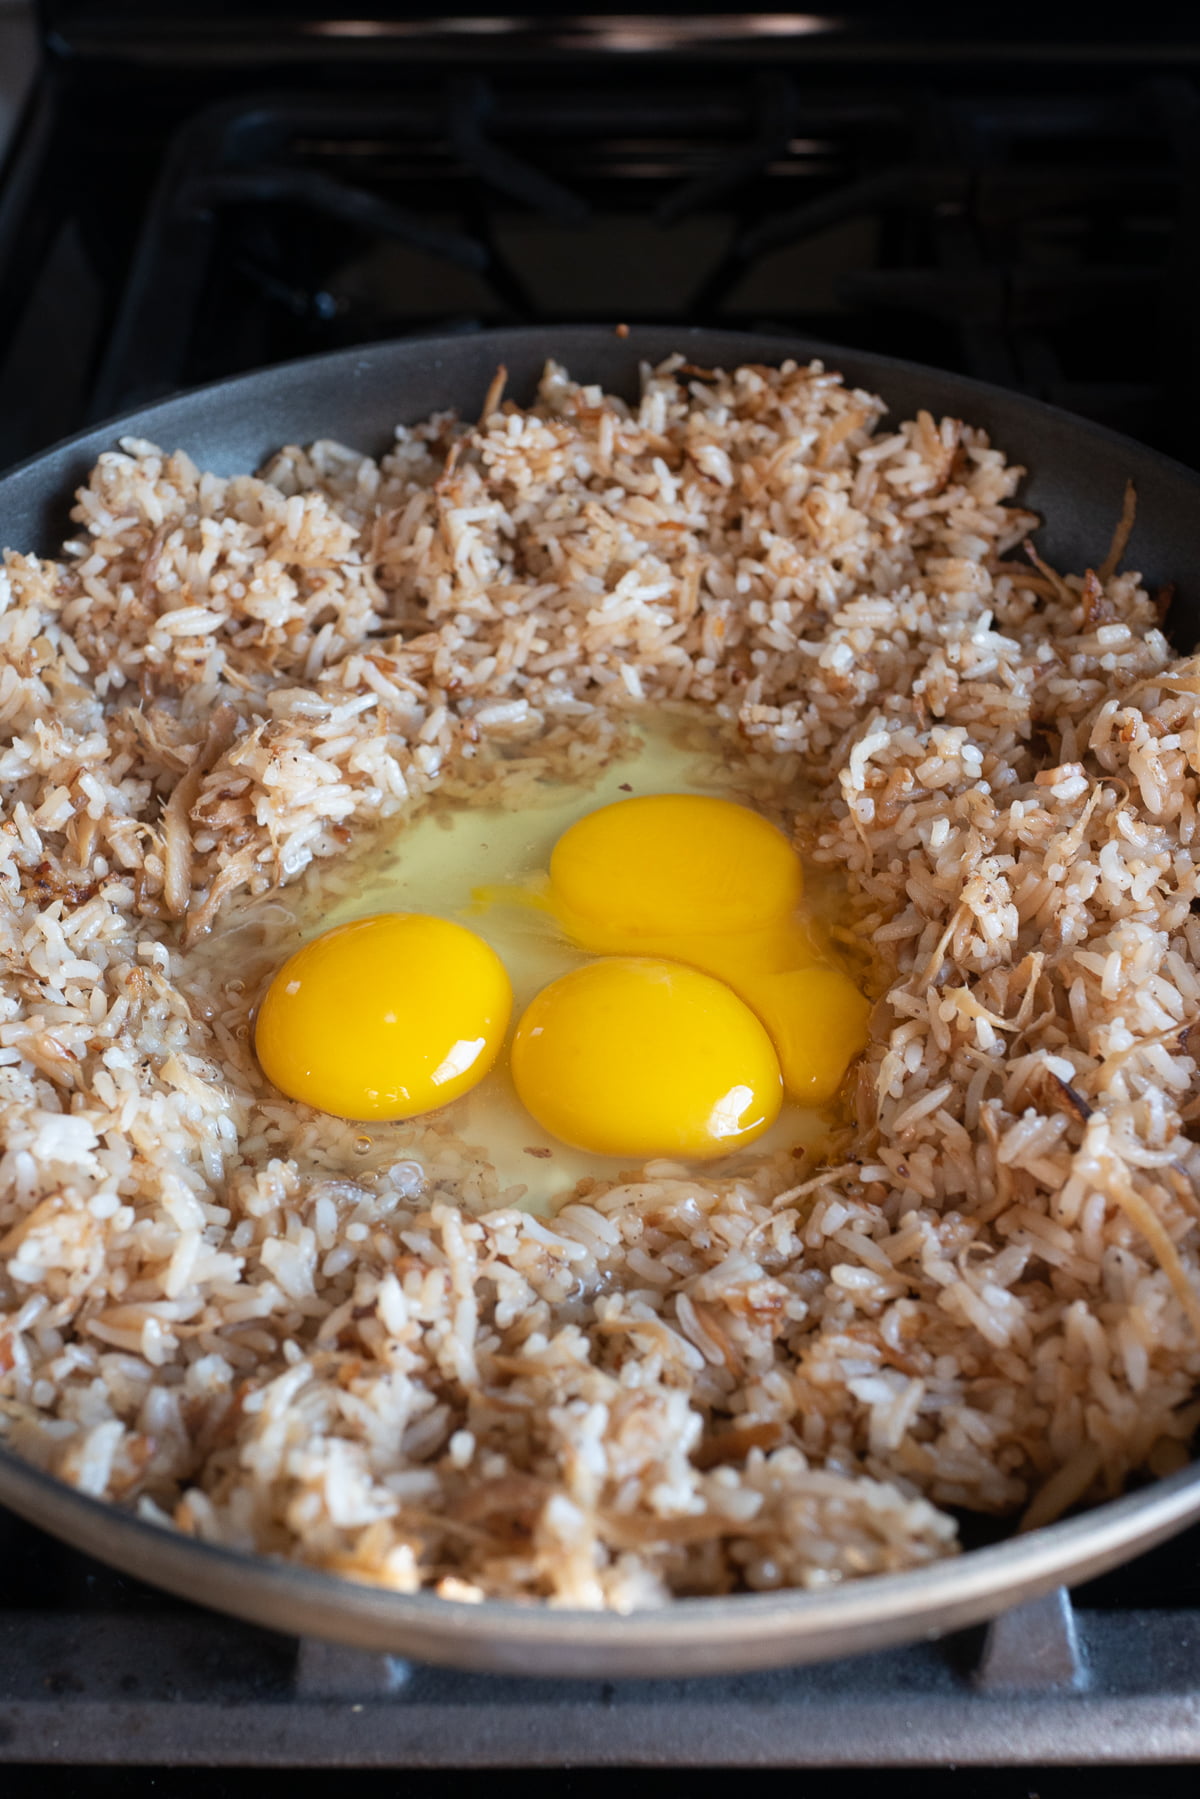 Right after adding eggs to the frying pan with the fried rice.